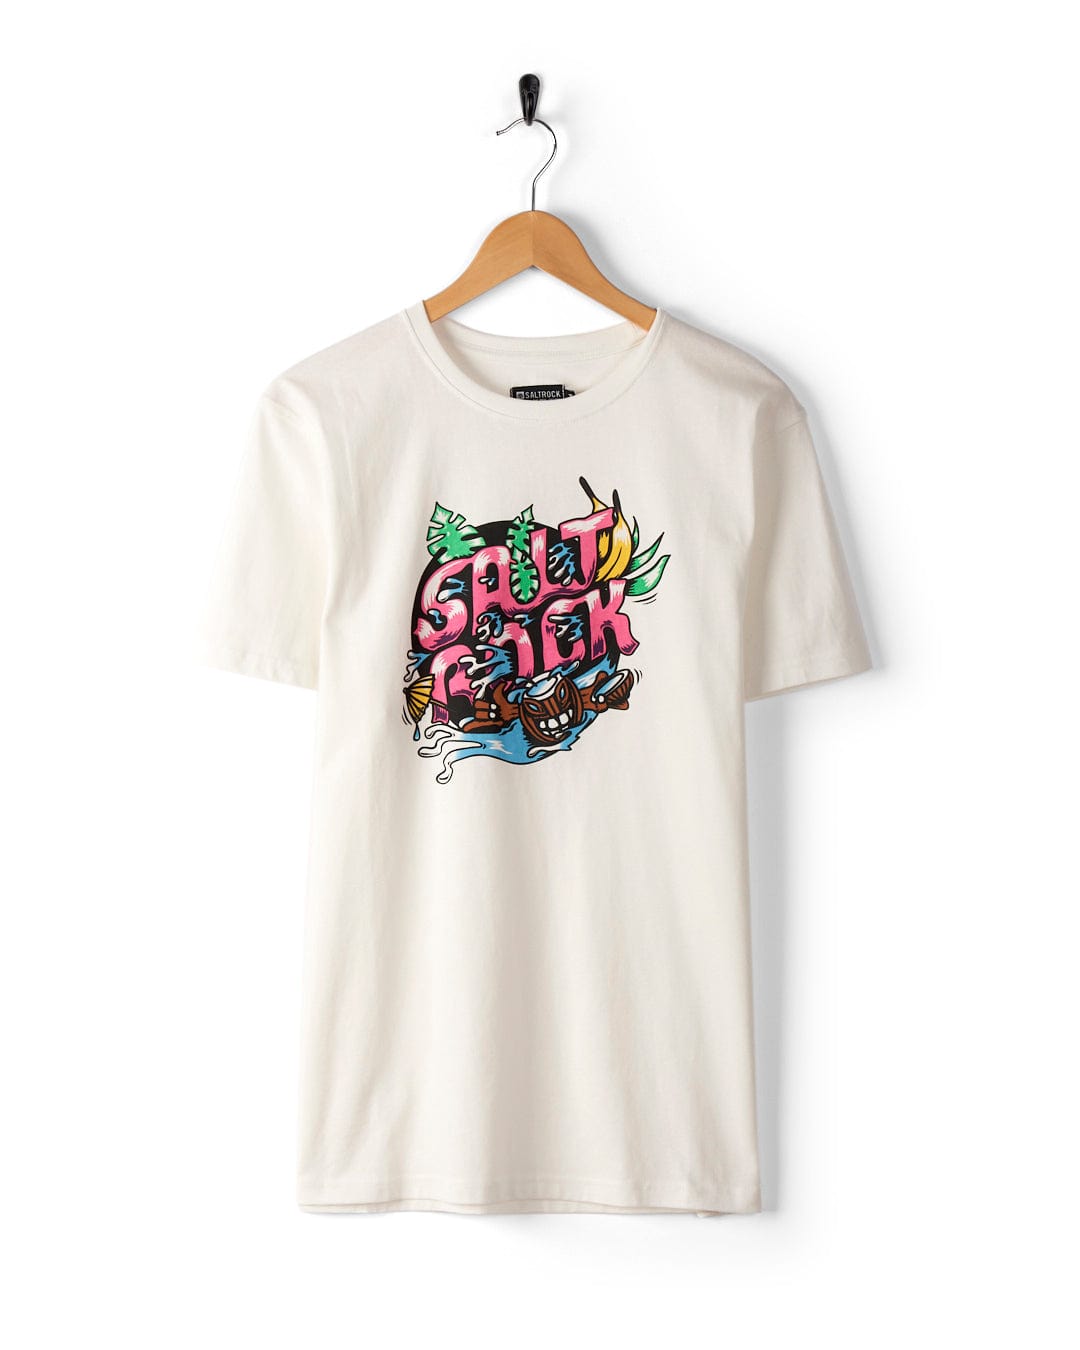 A white T-shirt made from 100% cotton features a colorful graphic design and the words "Tahiti - Mens Short Sleeve T-Shirt - White" printed on the front. Hung on a wooden hanger against a clean white background, this piece channels that laid-back Saltrock vibe.